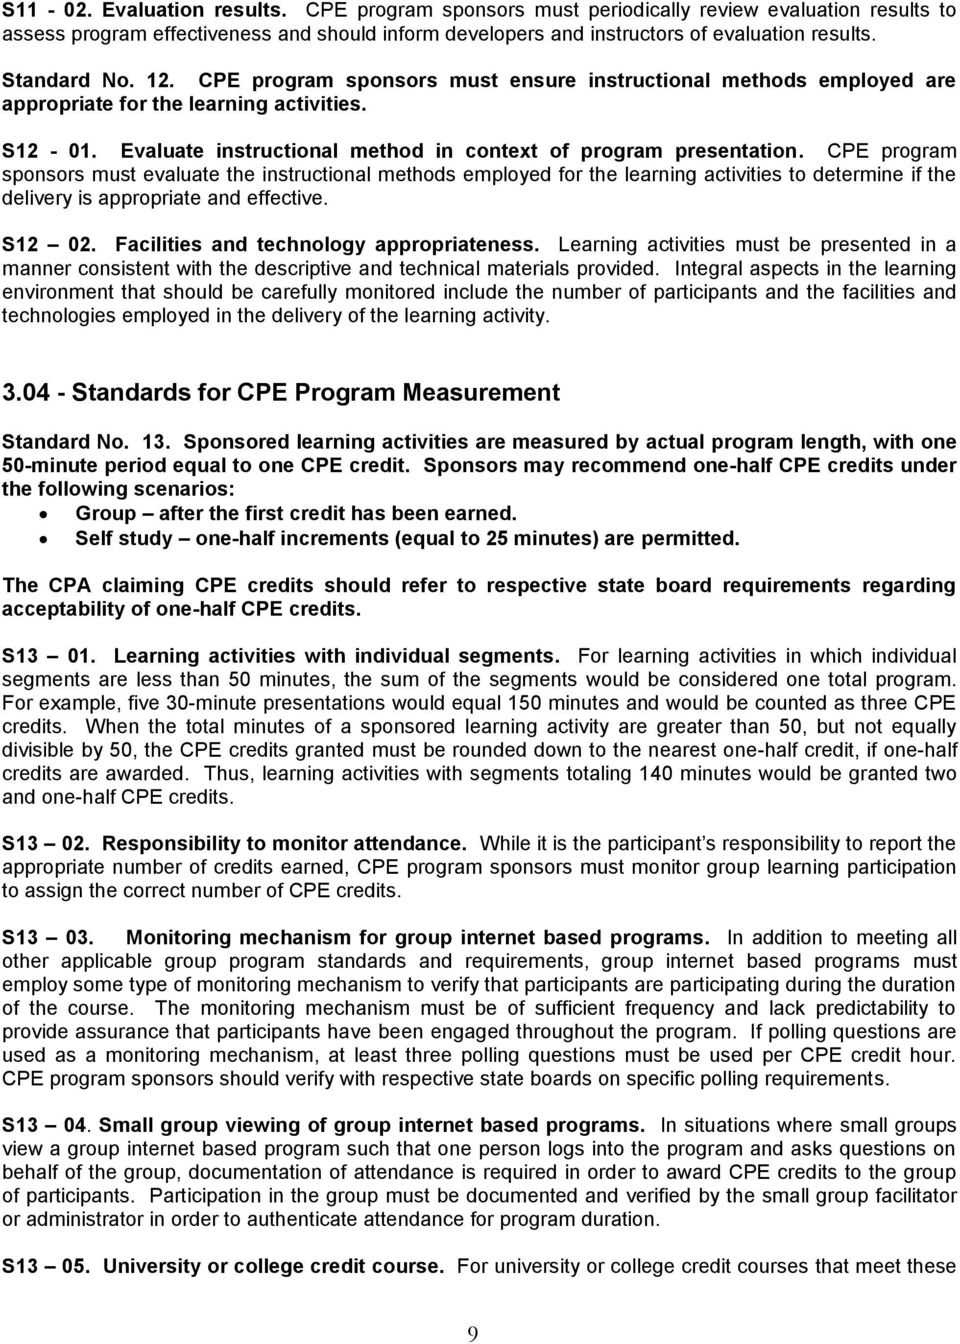 CPE program sponsors must evaluate the instructional methods employed for the learning activities to determine if the delivery is appropriate and effective. S12 02.